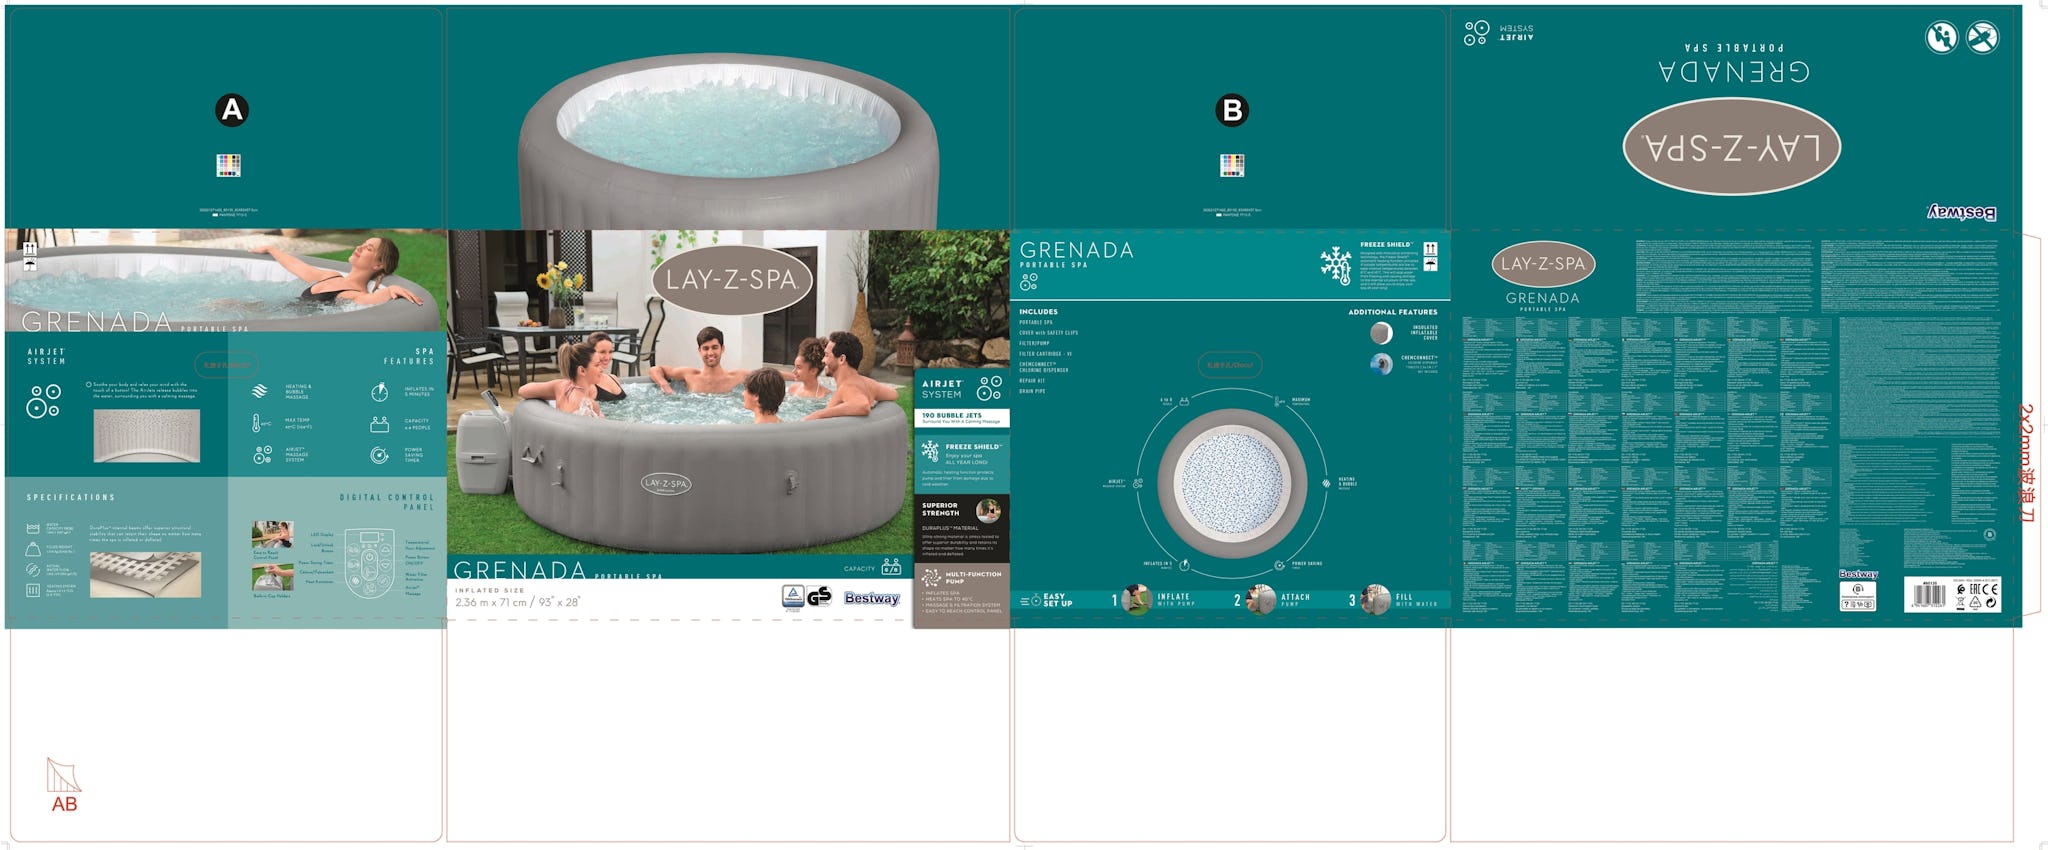 Spas Gonflables Spa gonflable rond Lay-Z-Spa Grenada Airjet™ 6 - 8 personnes Bestway 27